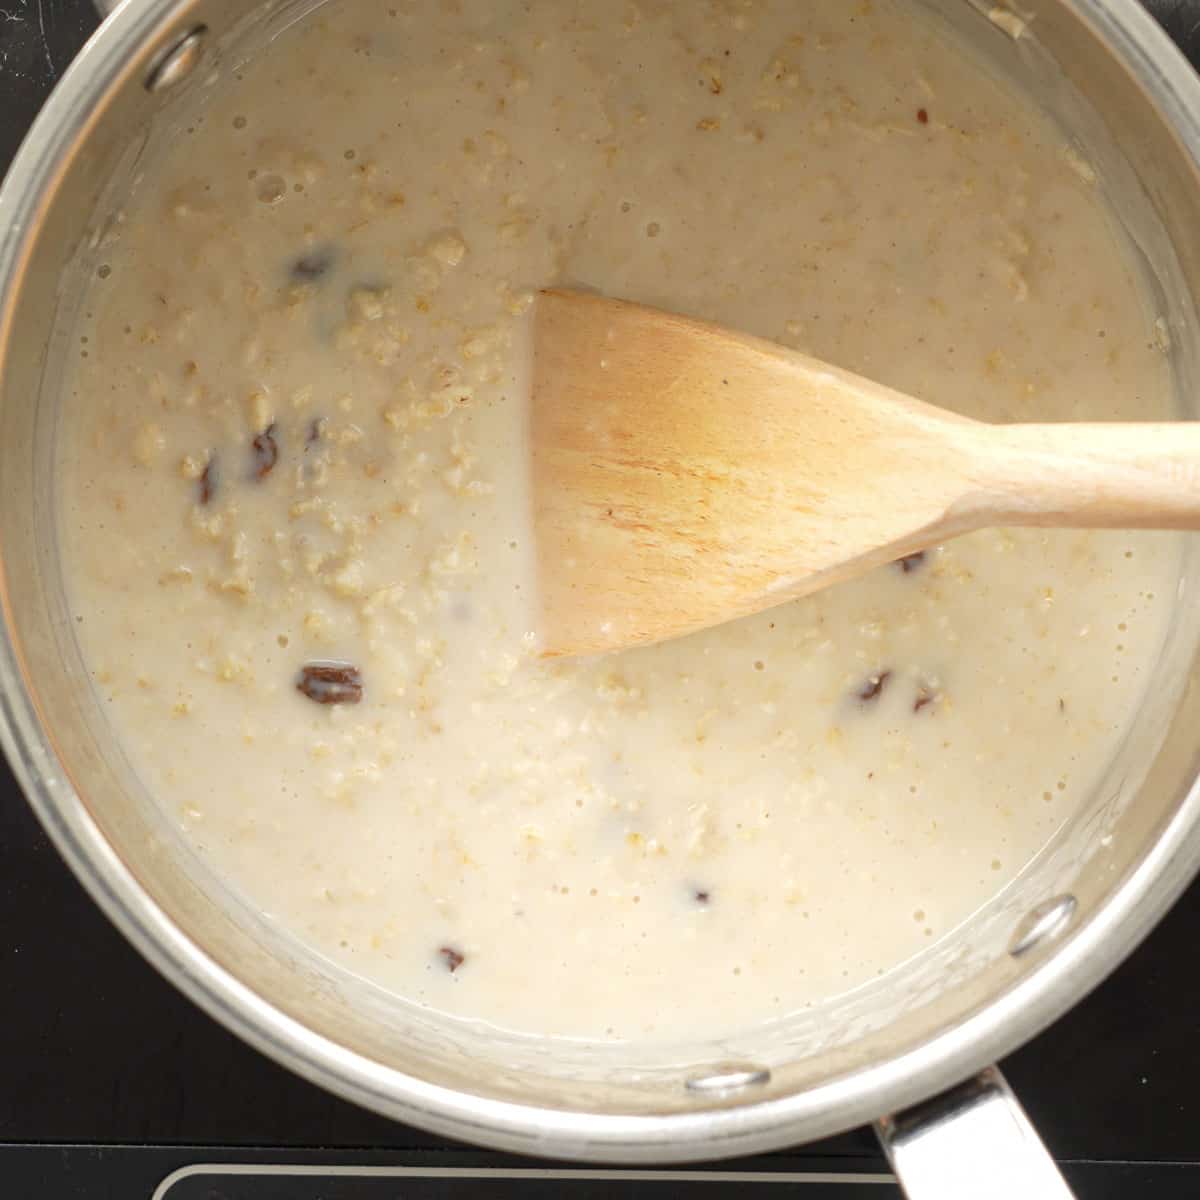 A saucepan of very creamy oatmeal in a sauce pan with raisins visible.